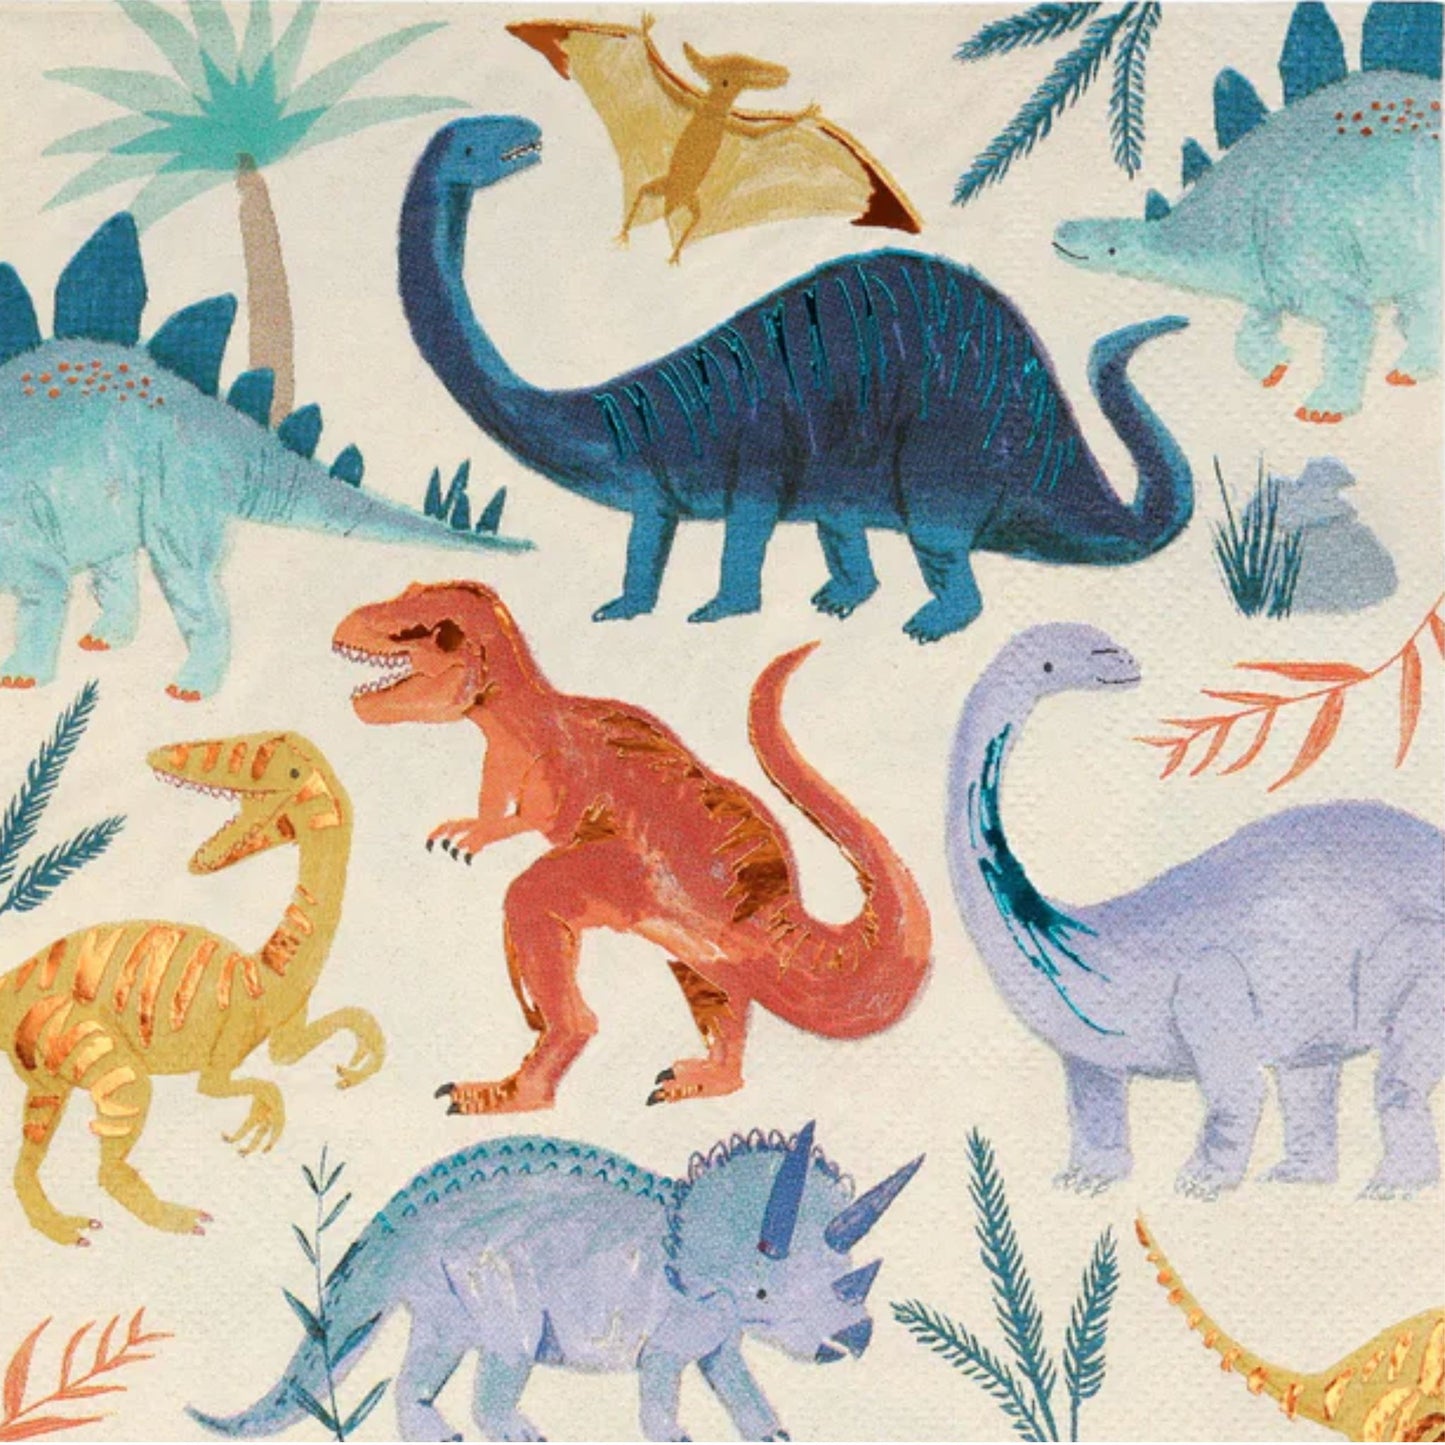 Awesome Dinosaur napkins by Meri Meri in blues, golds, reds and oranges. Napkins are printed with 8 different dinosaurs and trees